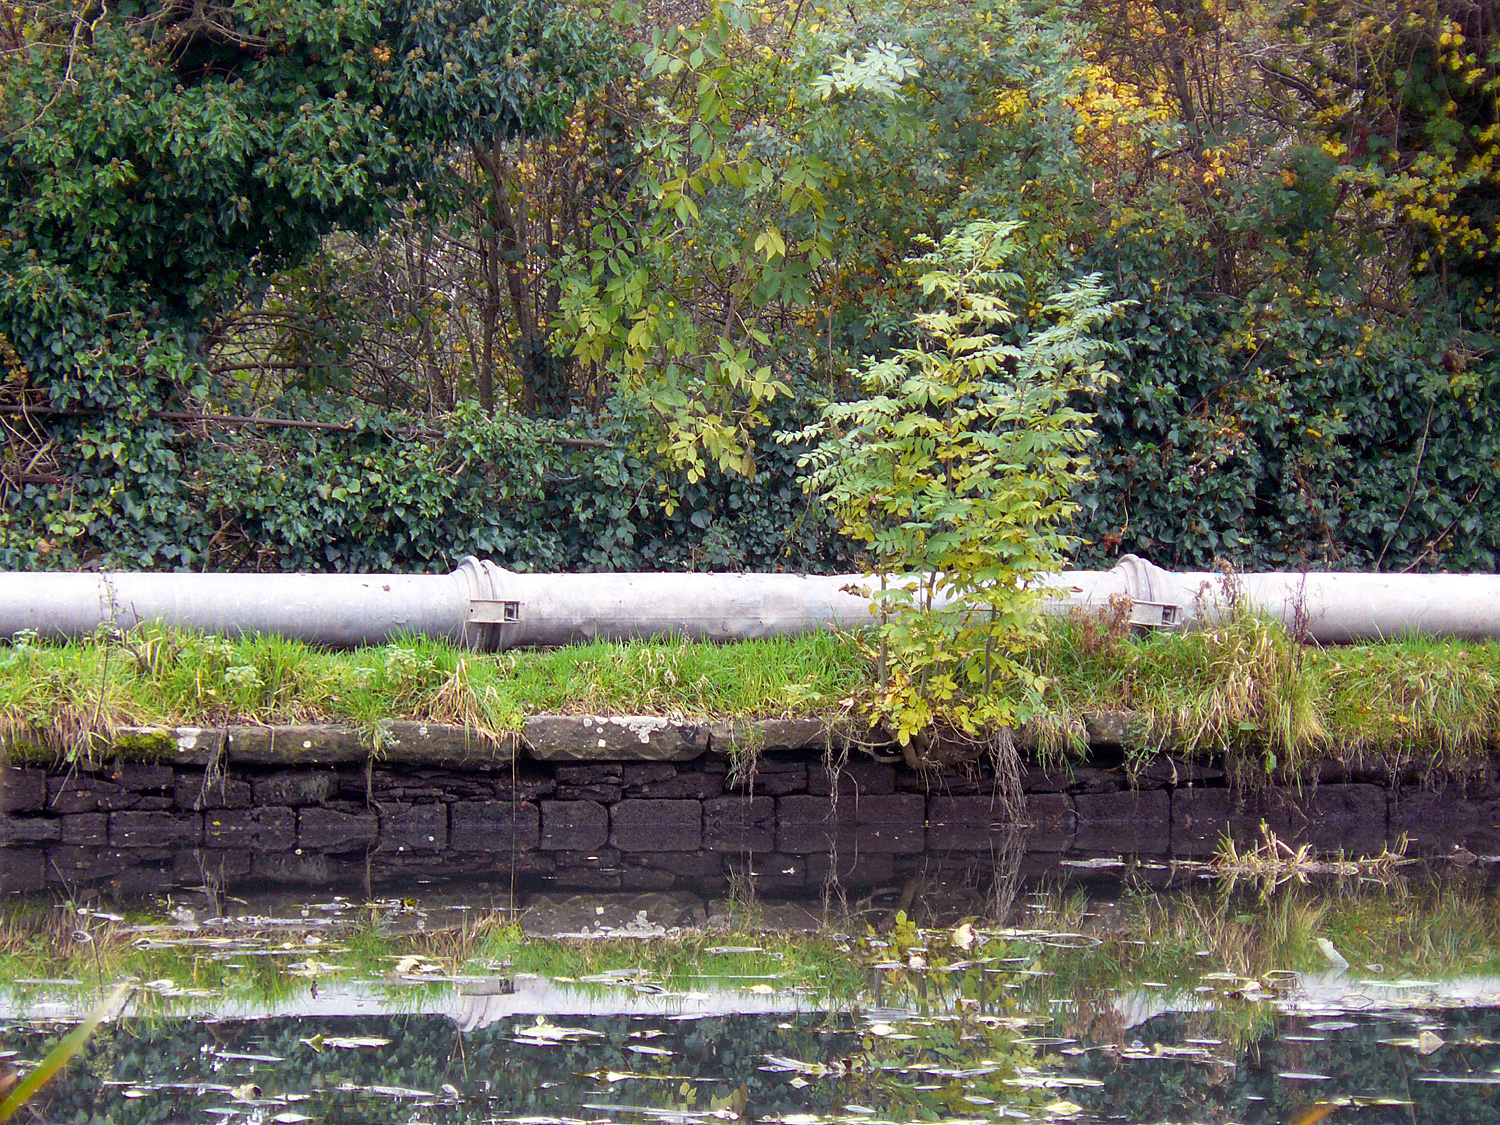 Stone wall supporting towpath